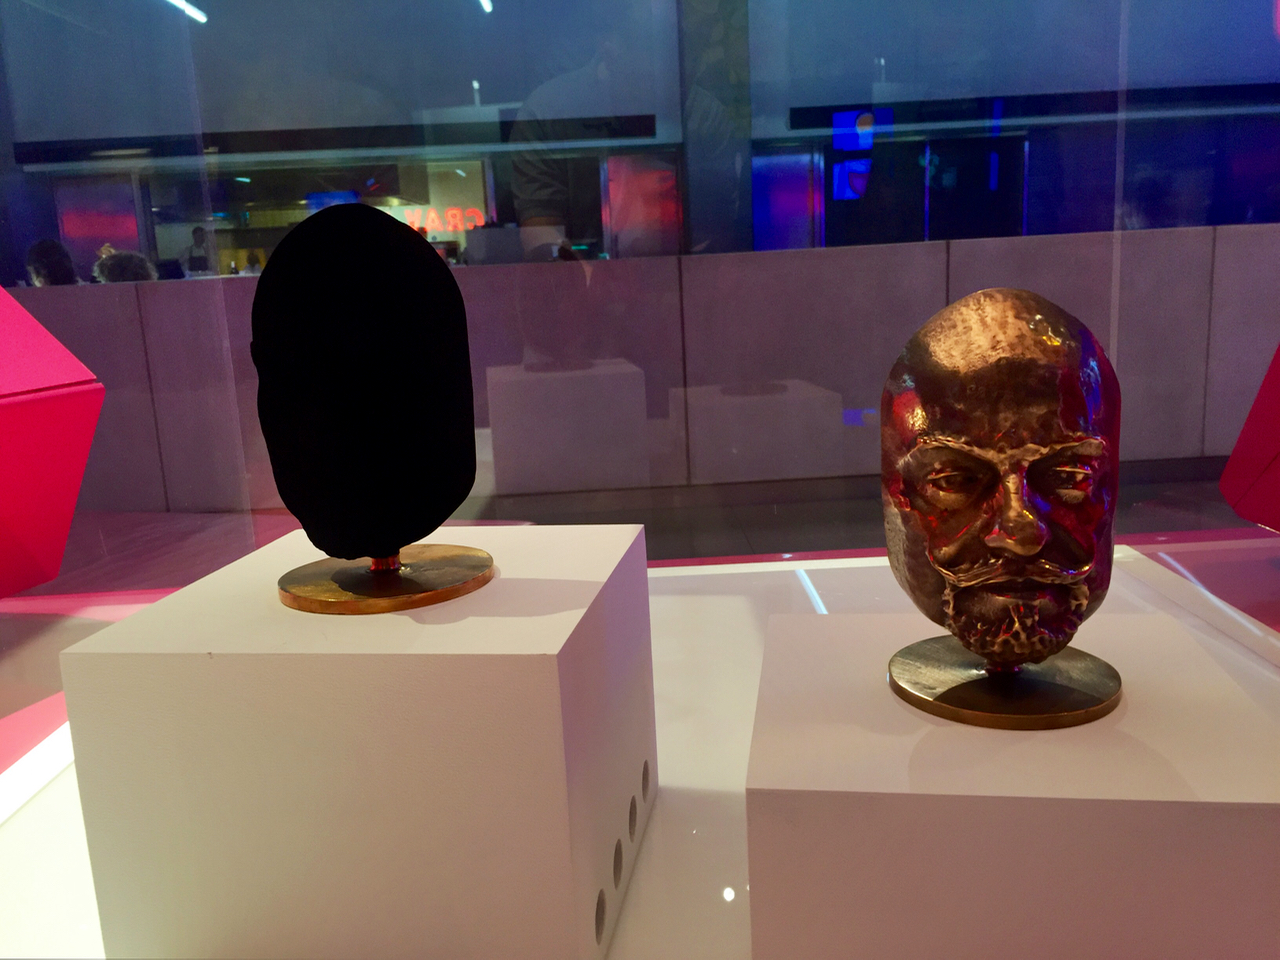  Two identical metal sculptures, one coated with Vantablack, the world's darkest material 